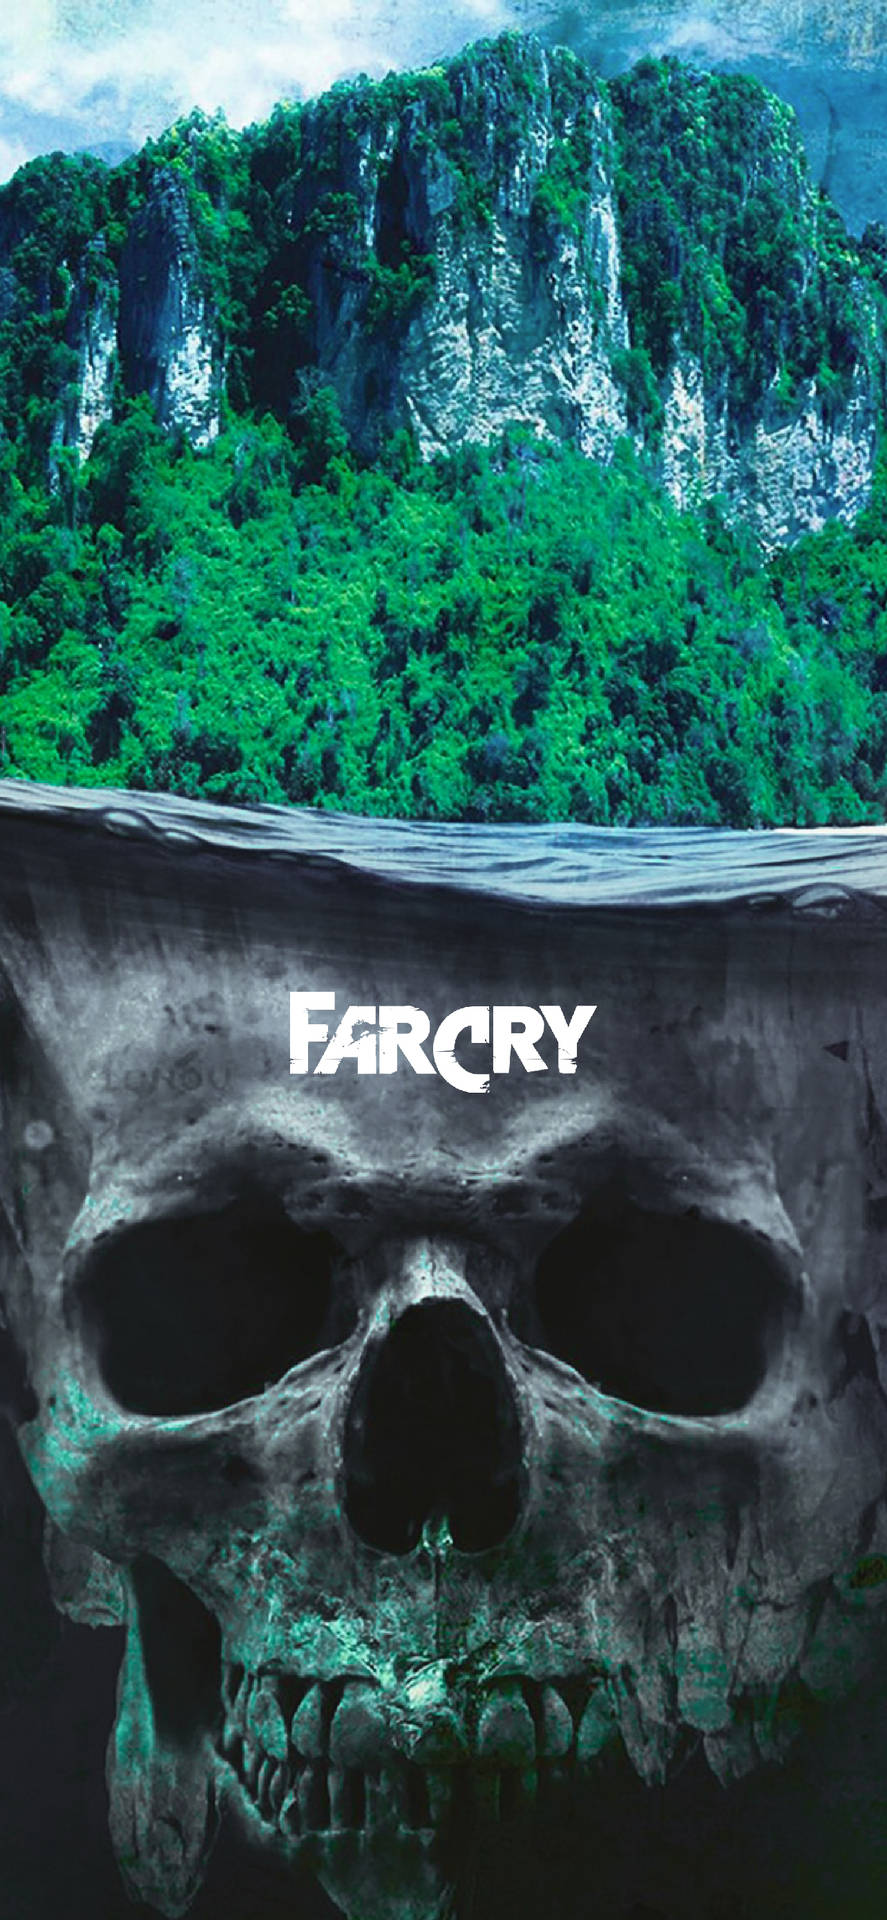 100+] Far Cry Iphone Wallpapers | Wallpapers.Com